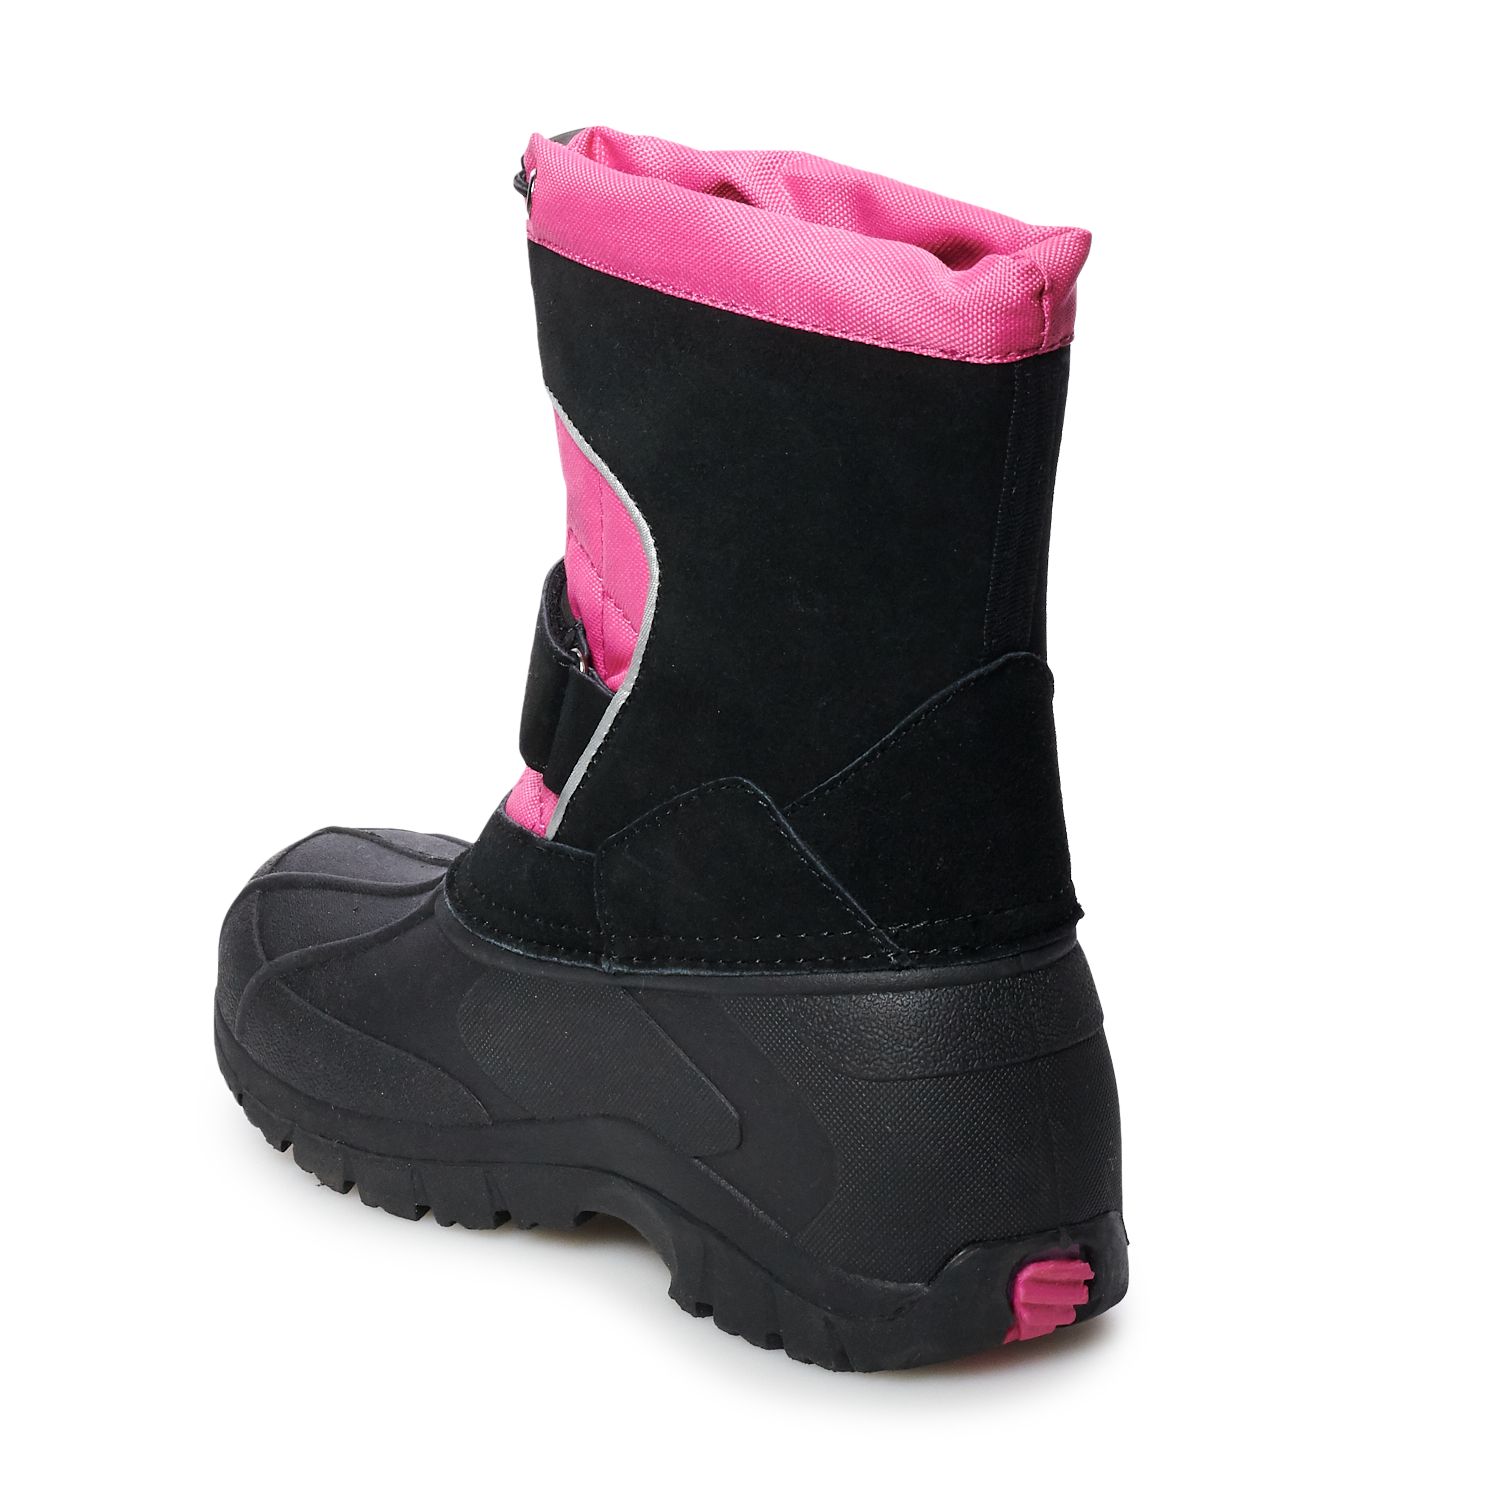 totes girls snow boots